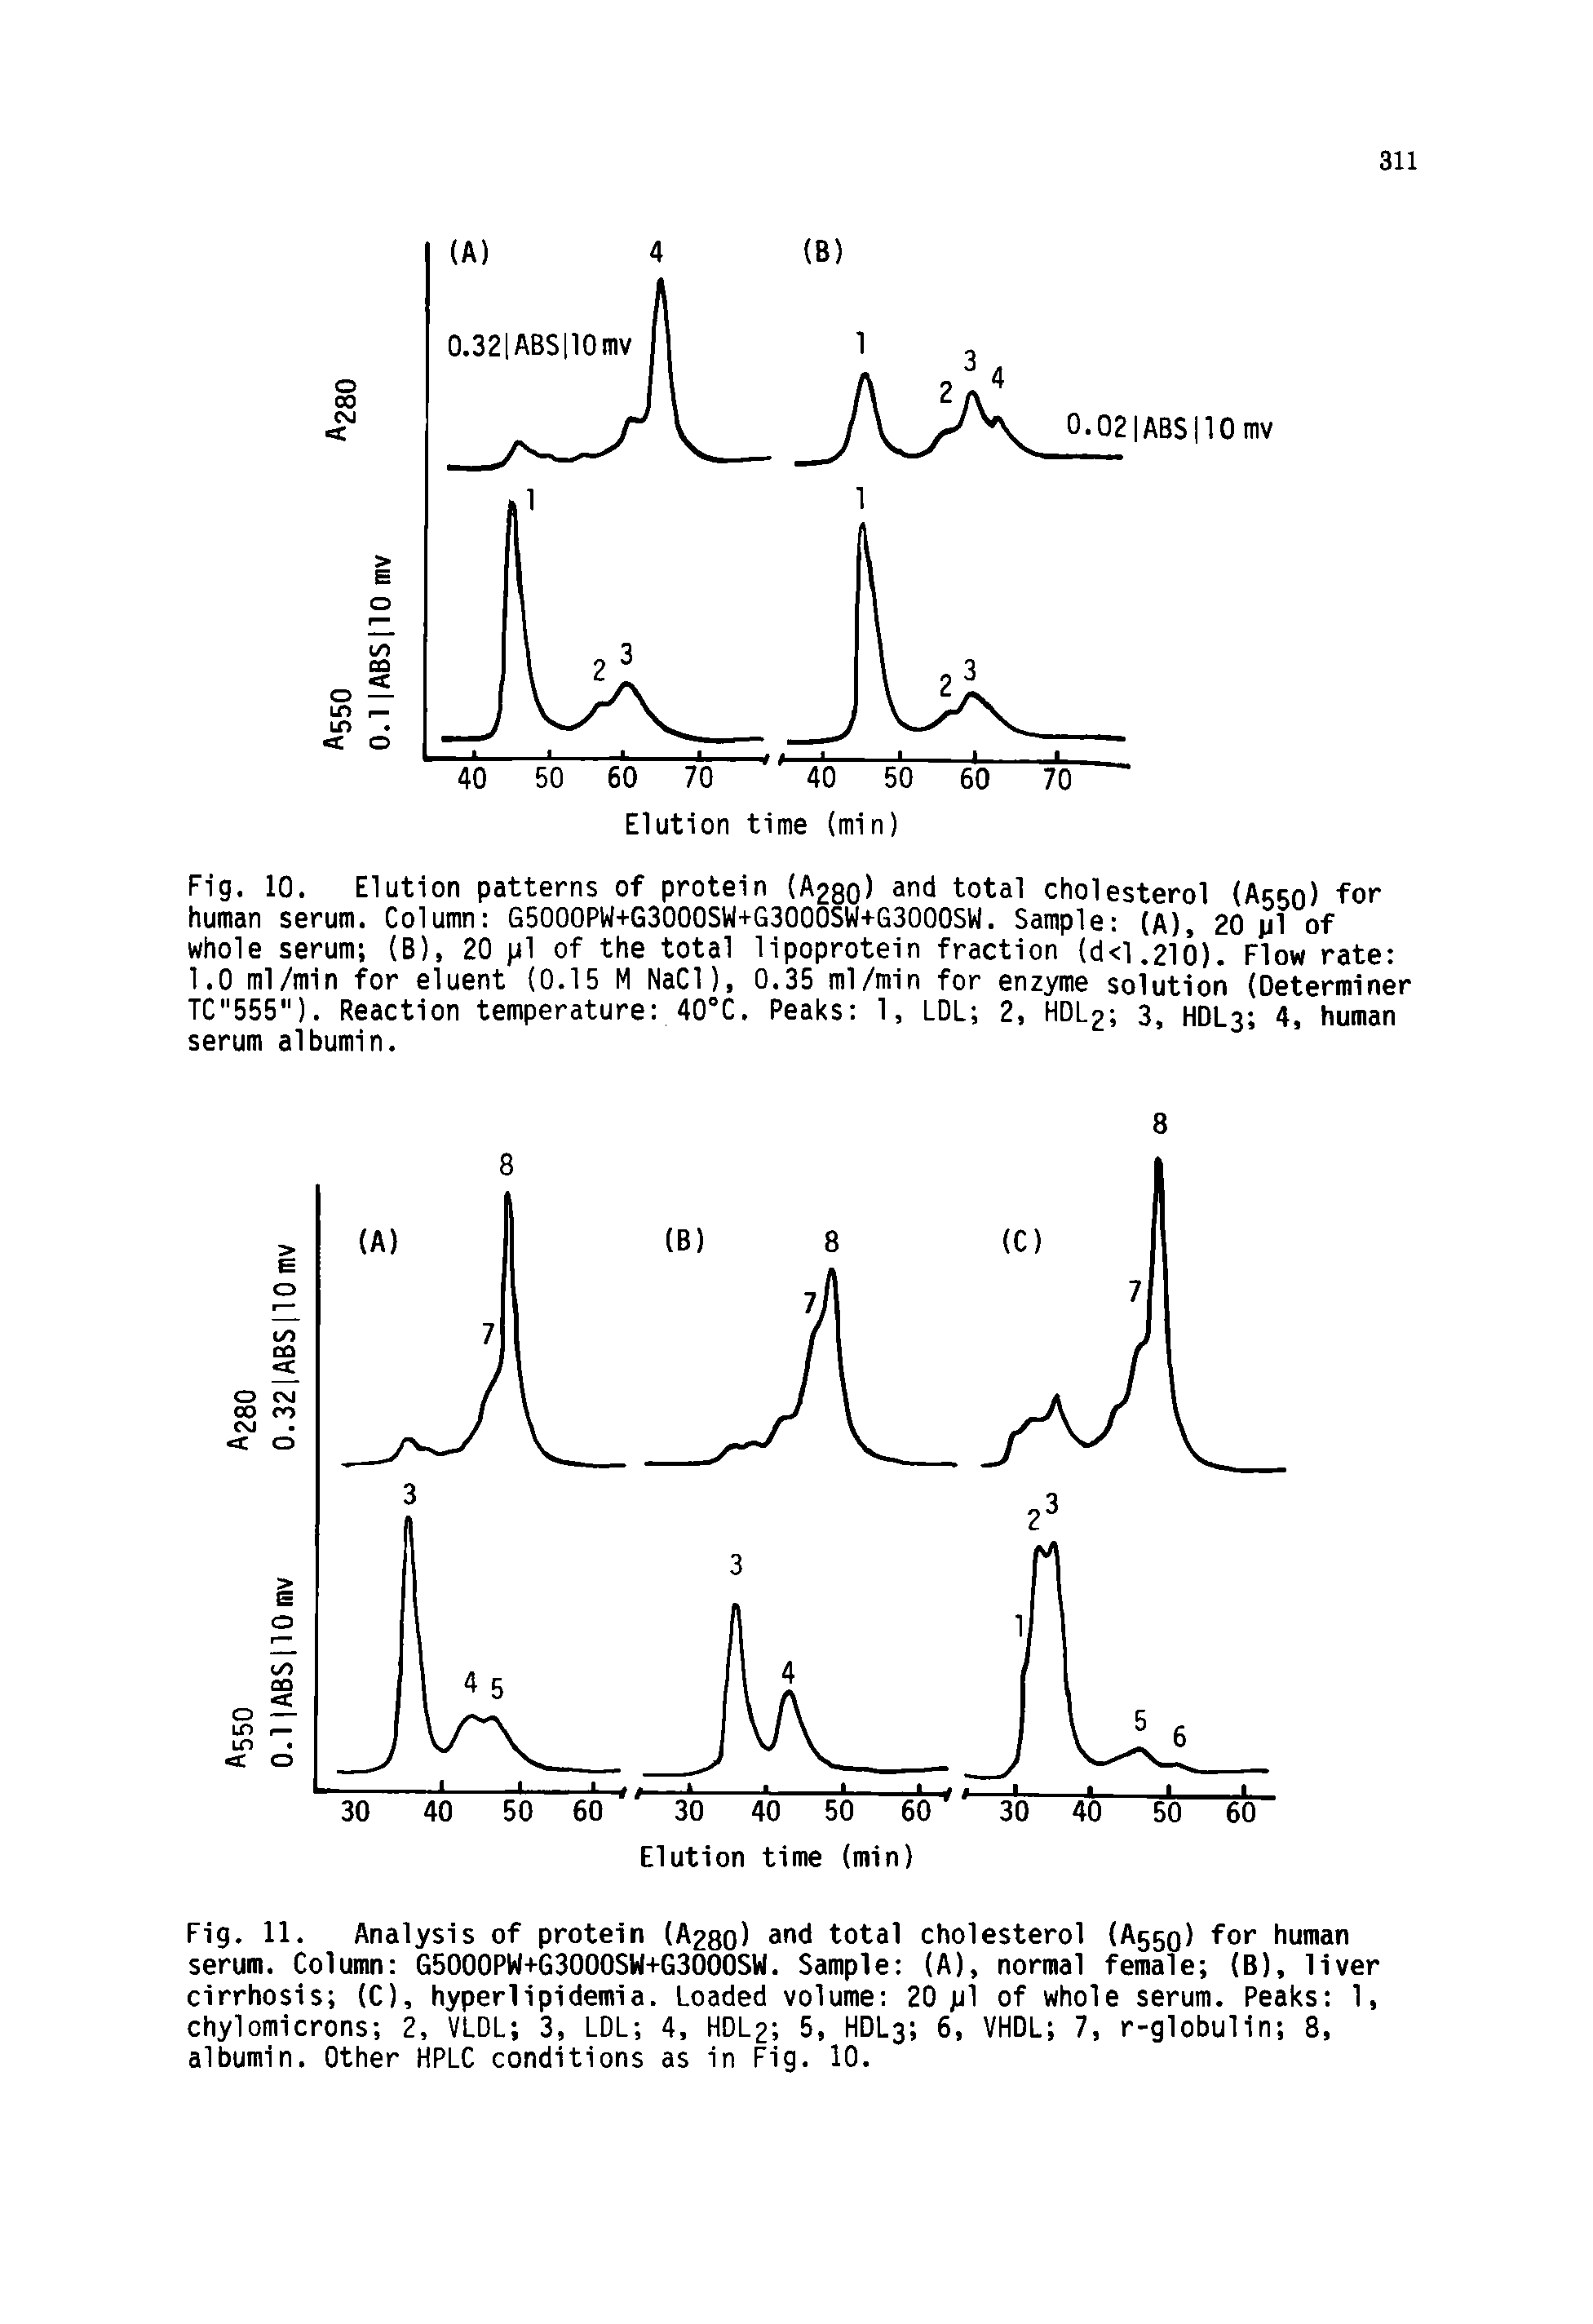 Fig. 11. Analysis of protein (A280) and total cholesterol A55Q) for human serum. Column G5000PW+G3000SW+G3000SW. Sample (A), normal female (B), liver cirrhosis (C), hyperlipidemia. Loaded volume 20 pi of whole serum. Peaks 1, chylomicrons 2, VLDL 3, LDL 4, HDL2 5, HDL3 6, VHDL 7, r-globul1n 8, albumin. Other HPLC conditions as in Fig. 10.